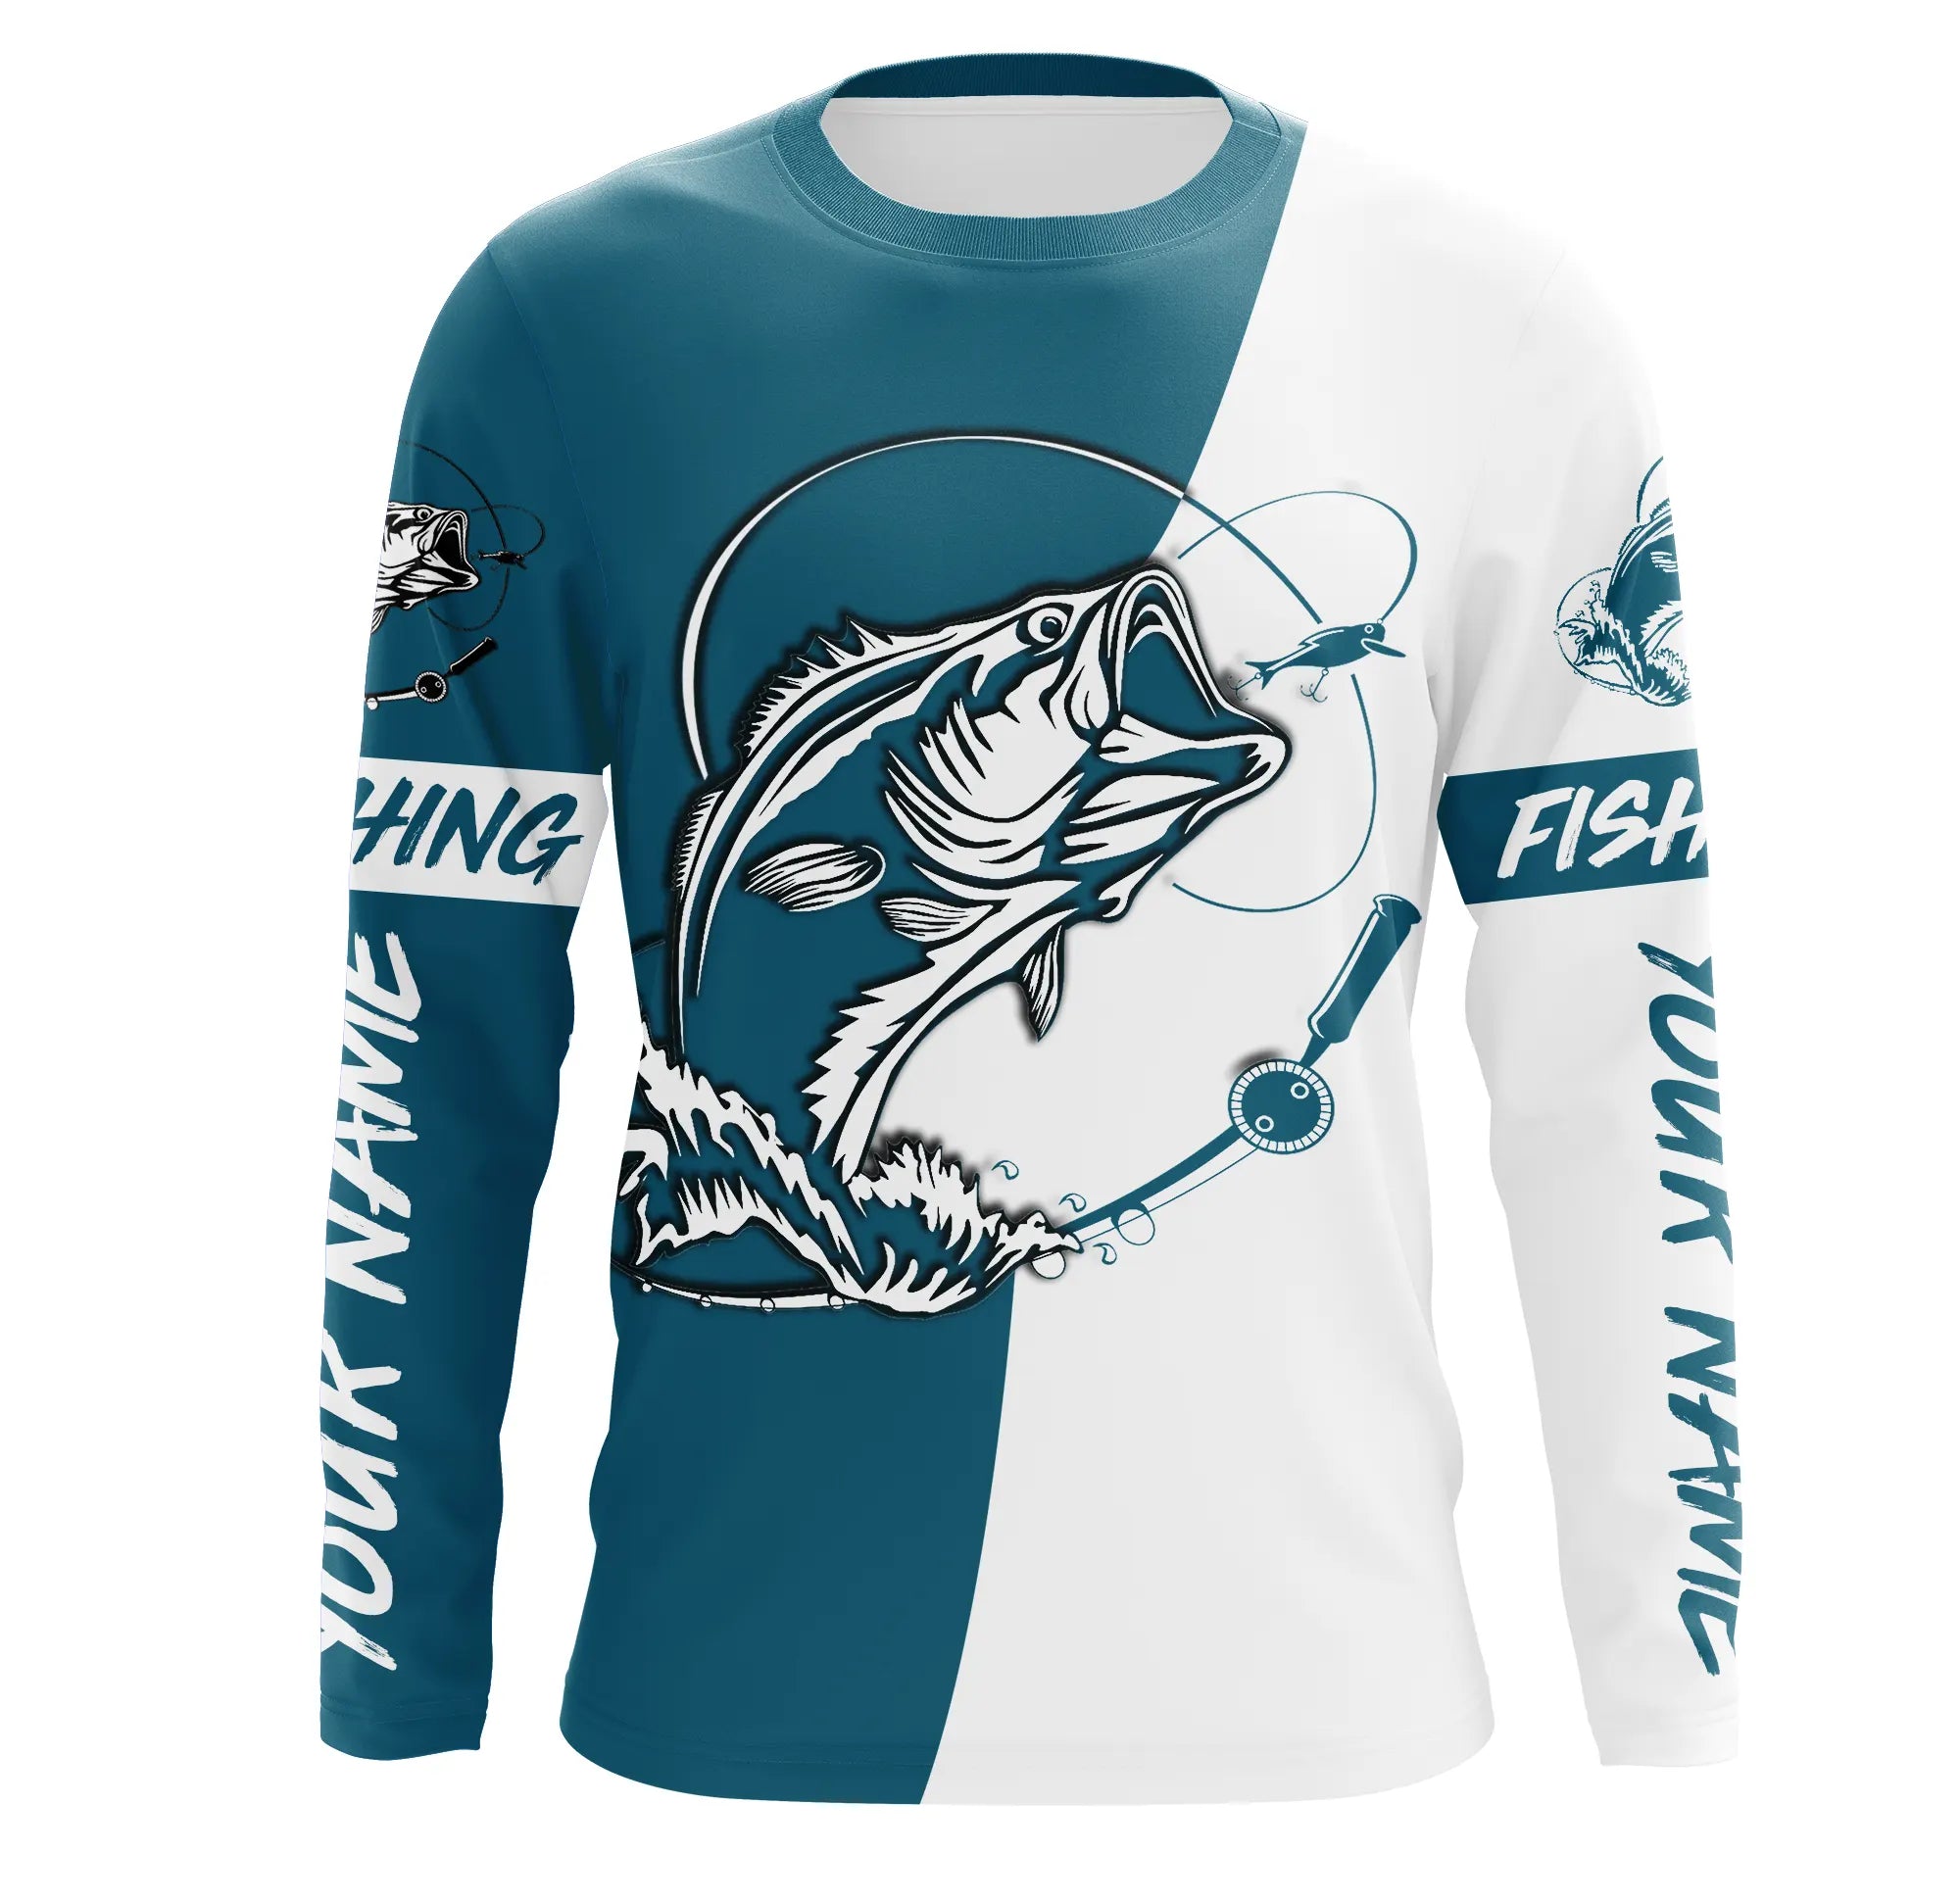 Bass Fishing Red Custom UV Protection All Over Printed Shirts Personal –  Myfihu, personalized fishing shirts 